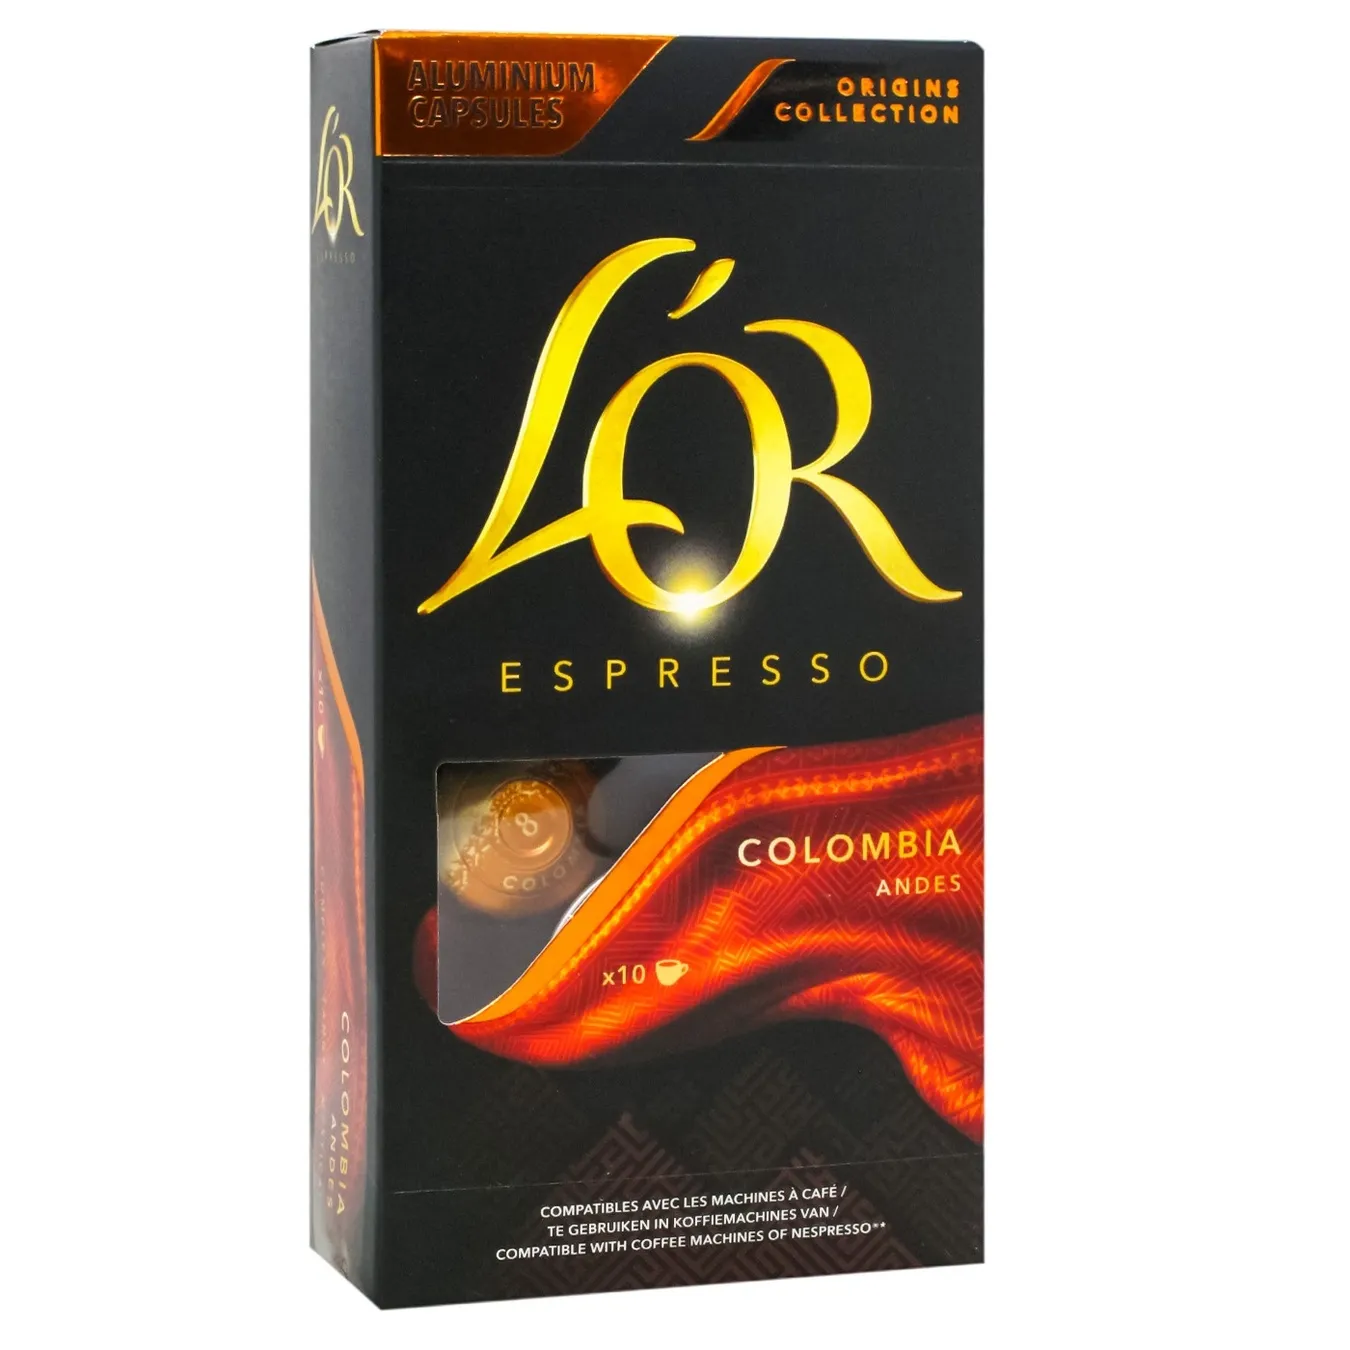 Coffee L'OR Espresso Colombia Andes roasted in capsules 52g